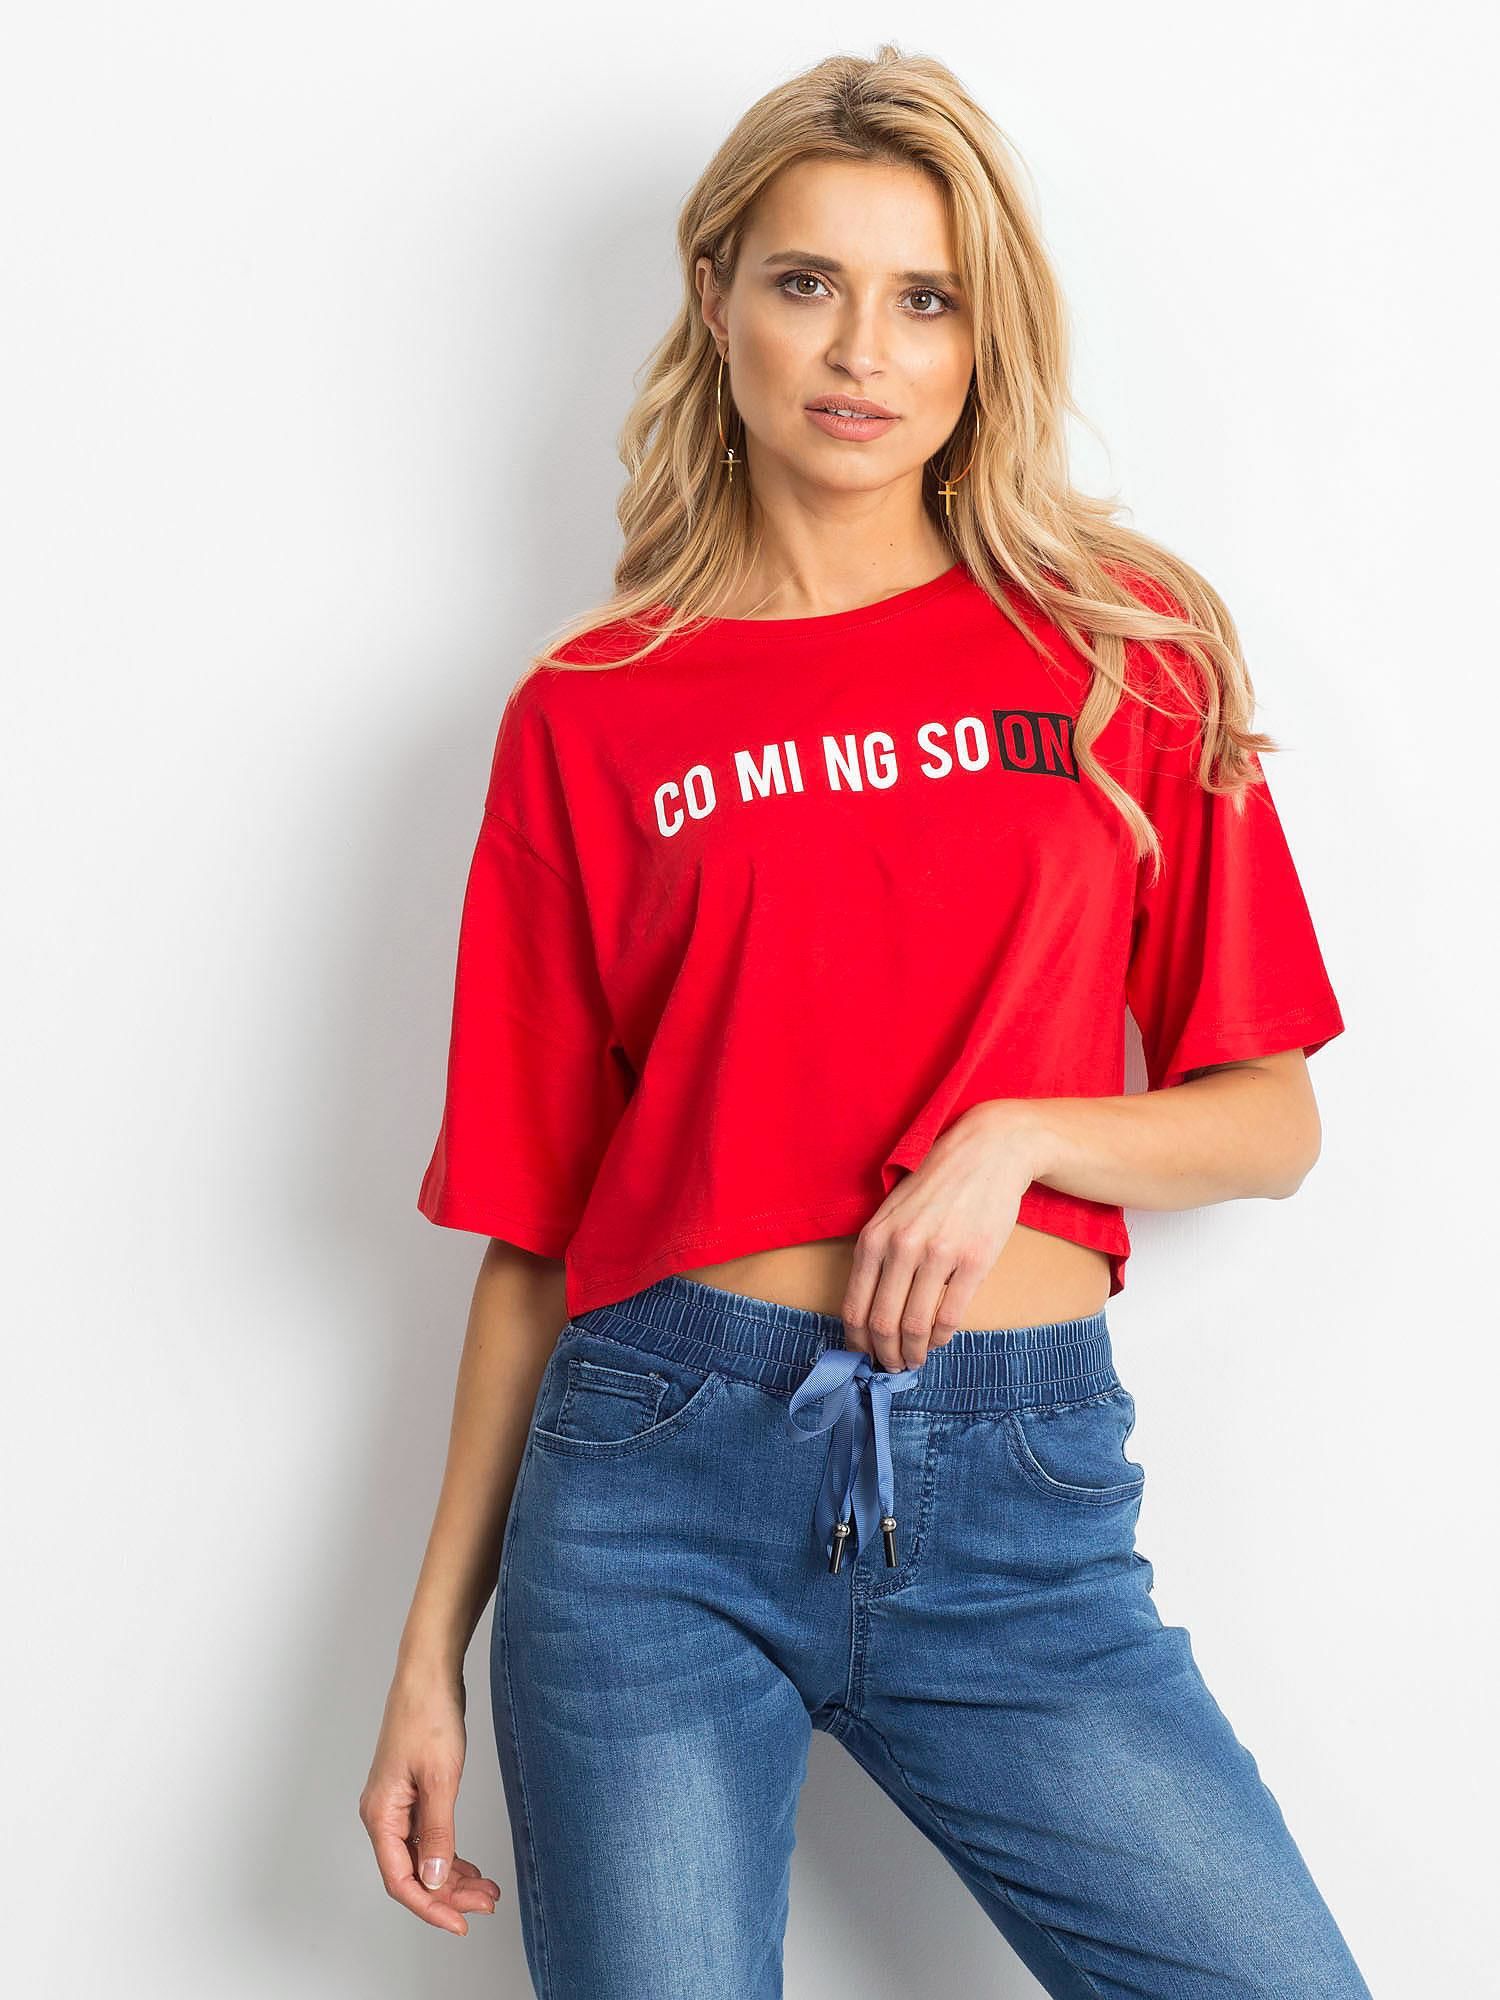 A short red T-shirt with an inscription